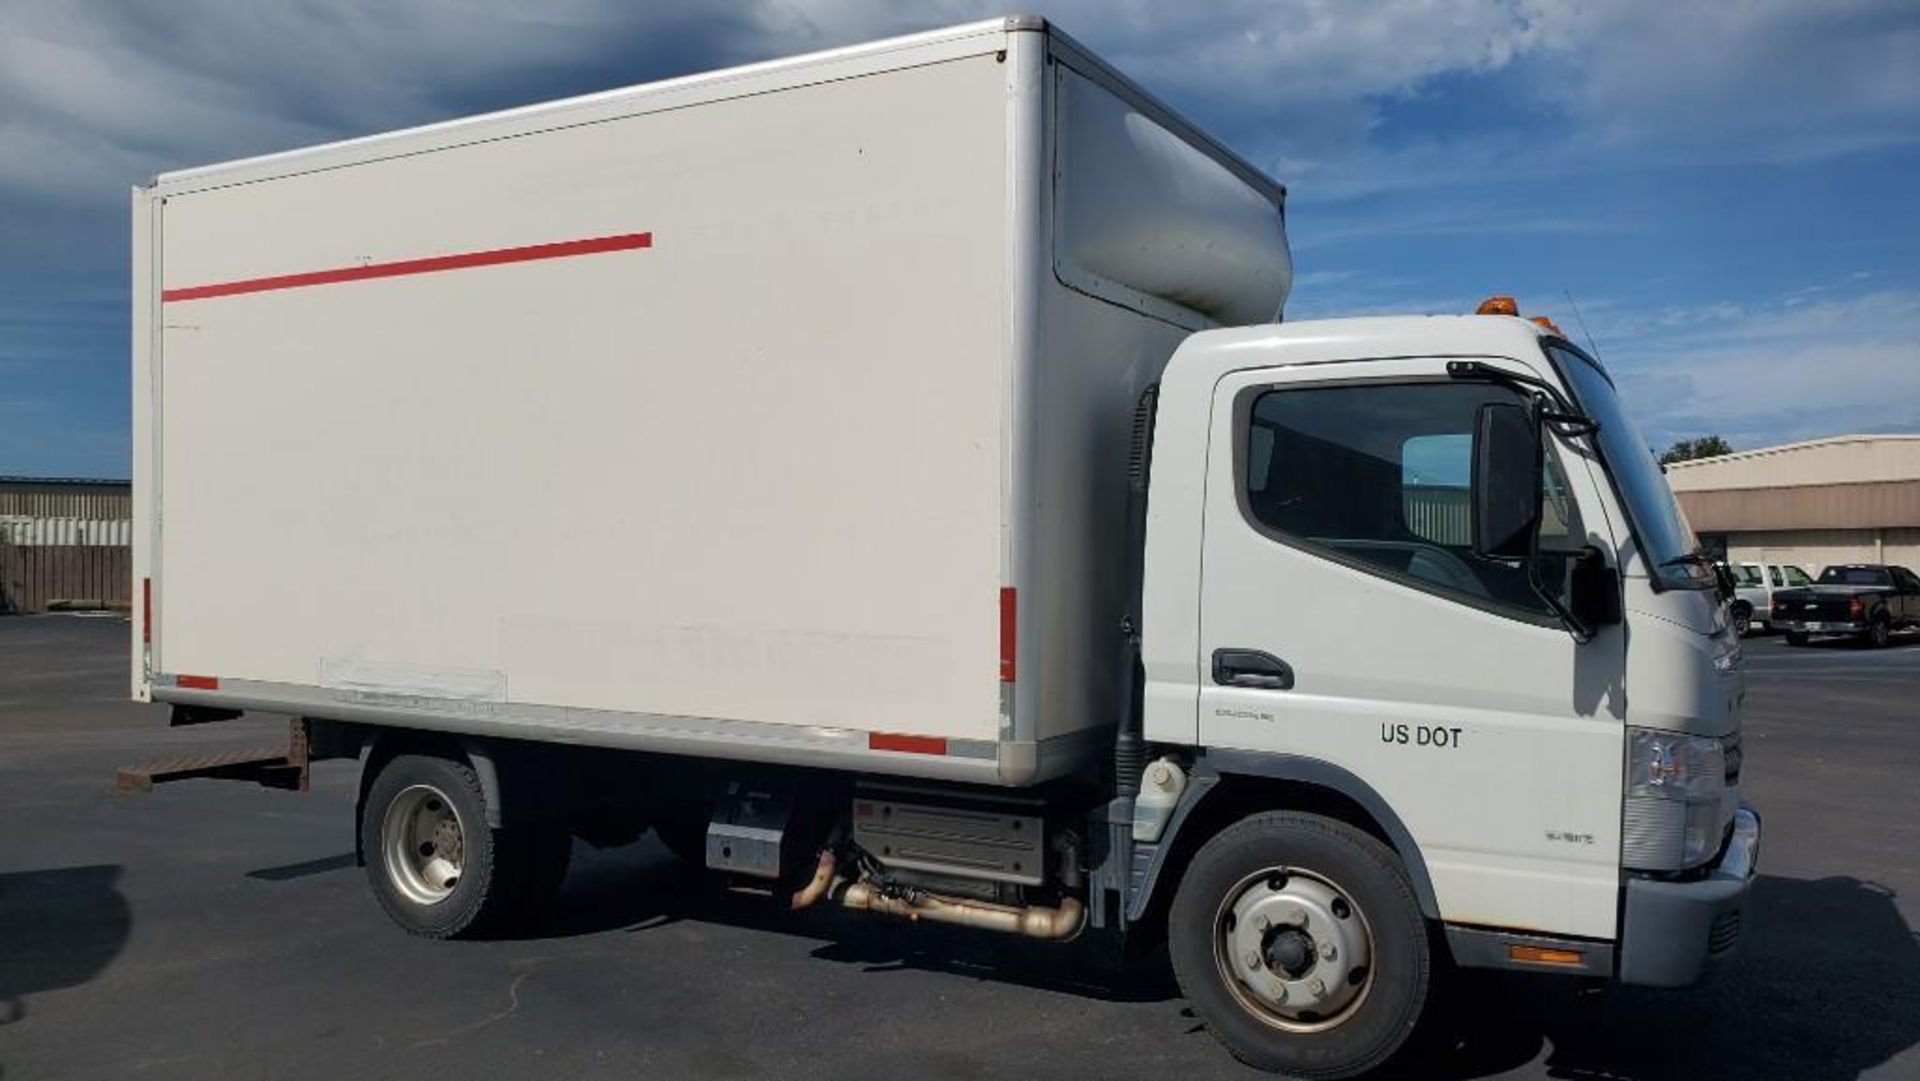 2015 MITSUBISHI FUSO FE180 BOX TRUCK APPROX 14' BOX, DIESEL ENGINE, AUTOMATIC TRANSMISSION - Image 3 of 39